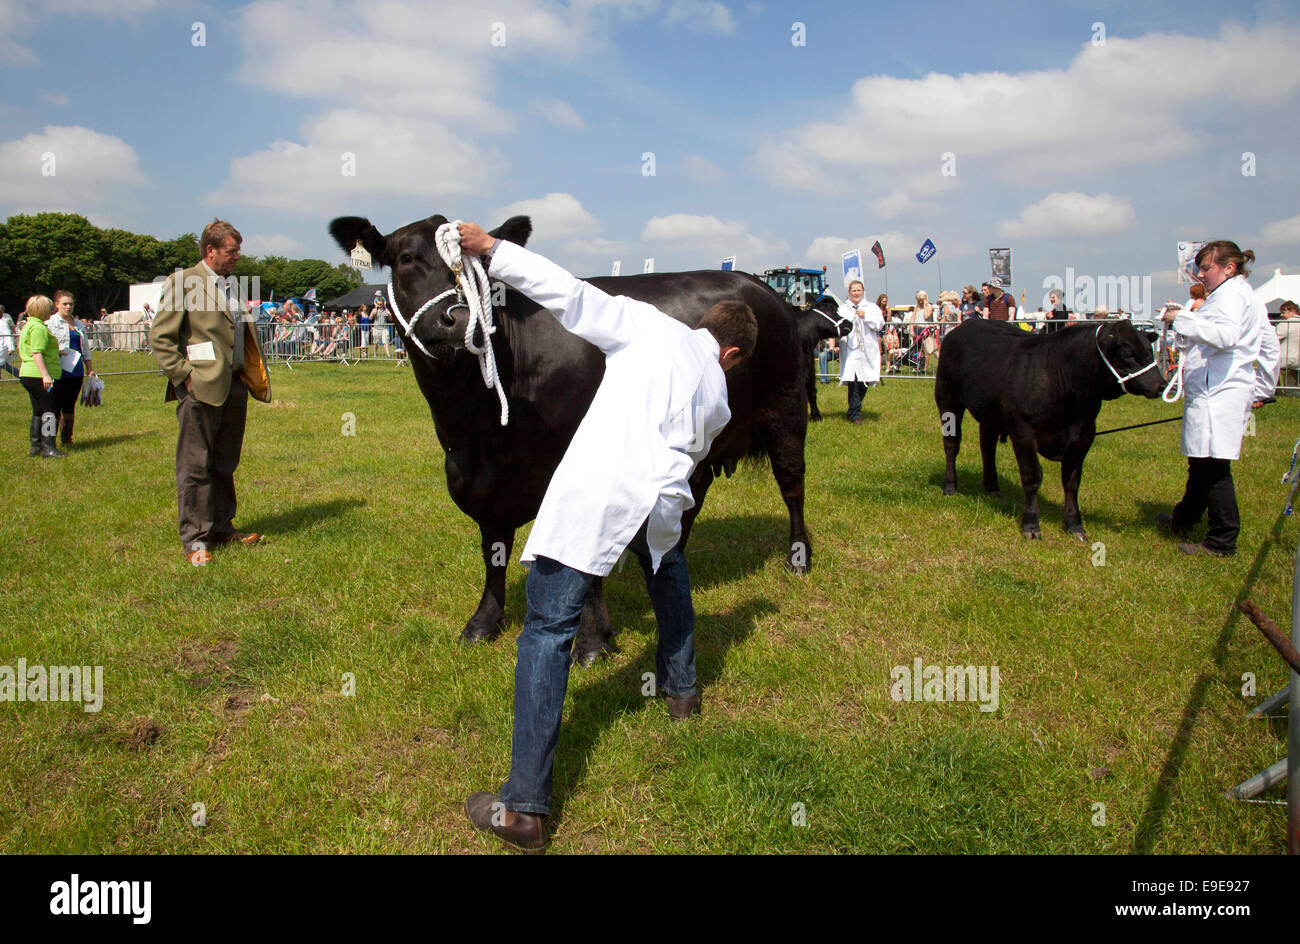 Judging cattle at the Honley Agricultural Show, West Yorkshire, England, U.K. Stock Photo